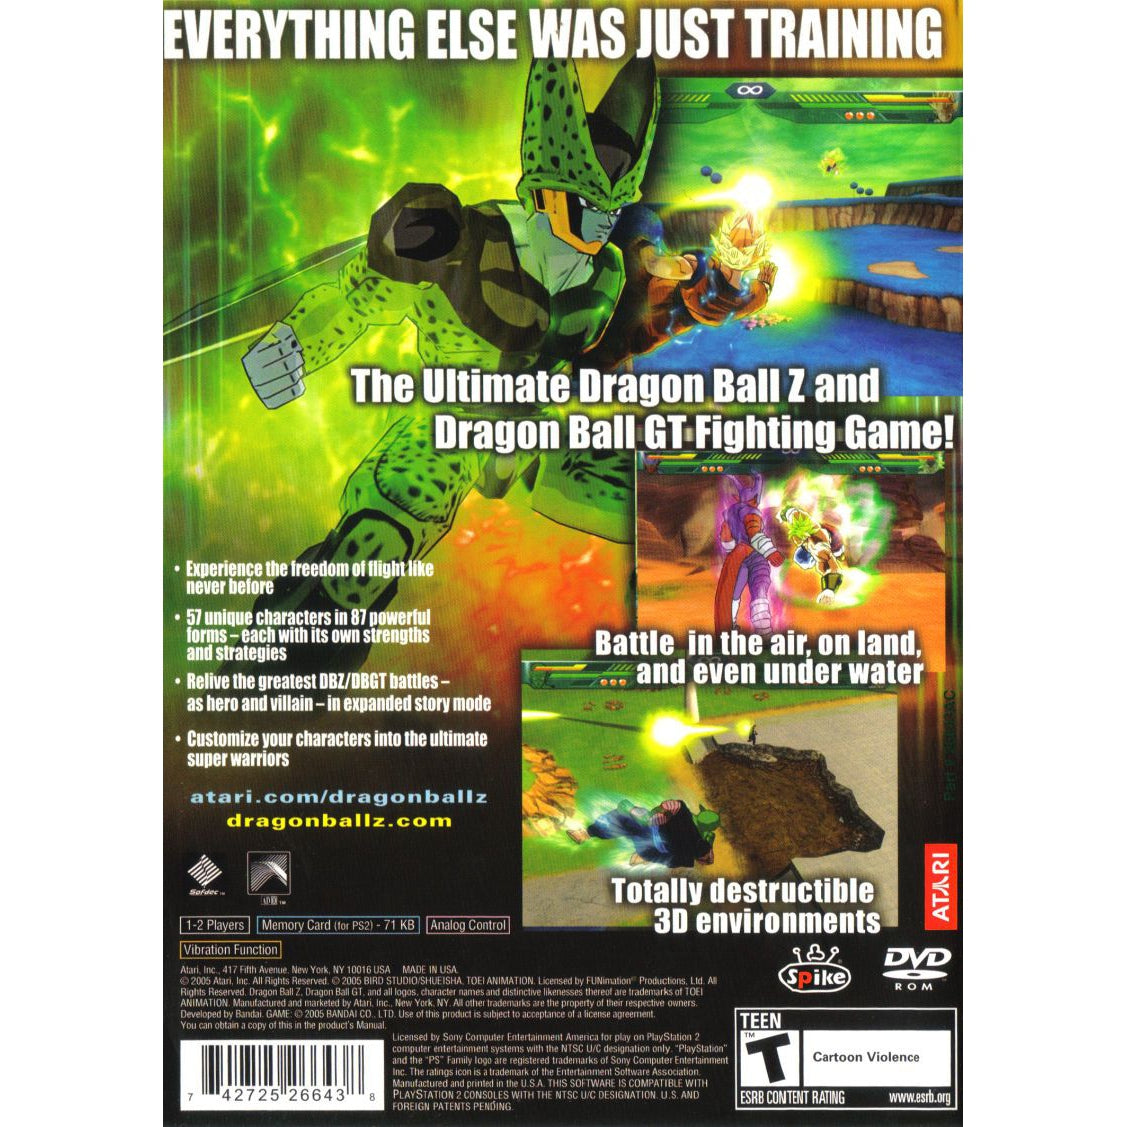 Dragon Ball Z: Budokai Tenkaichi - PlayStation 2 (PS2) Game Complete - YourGamingShop.com - Buy, Sell, Trade Video Games Online. 120 Day Warranty. Satisfaction Guaranteed.